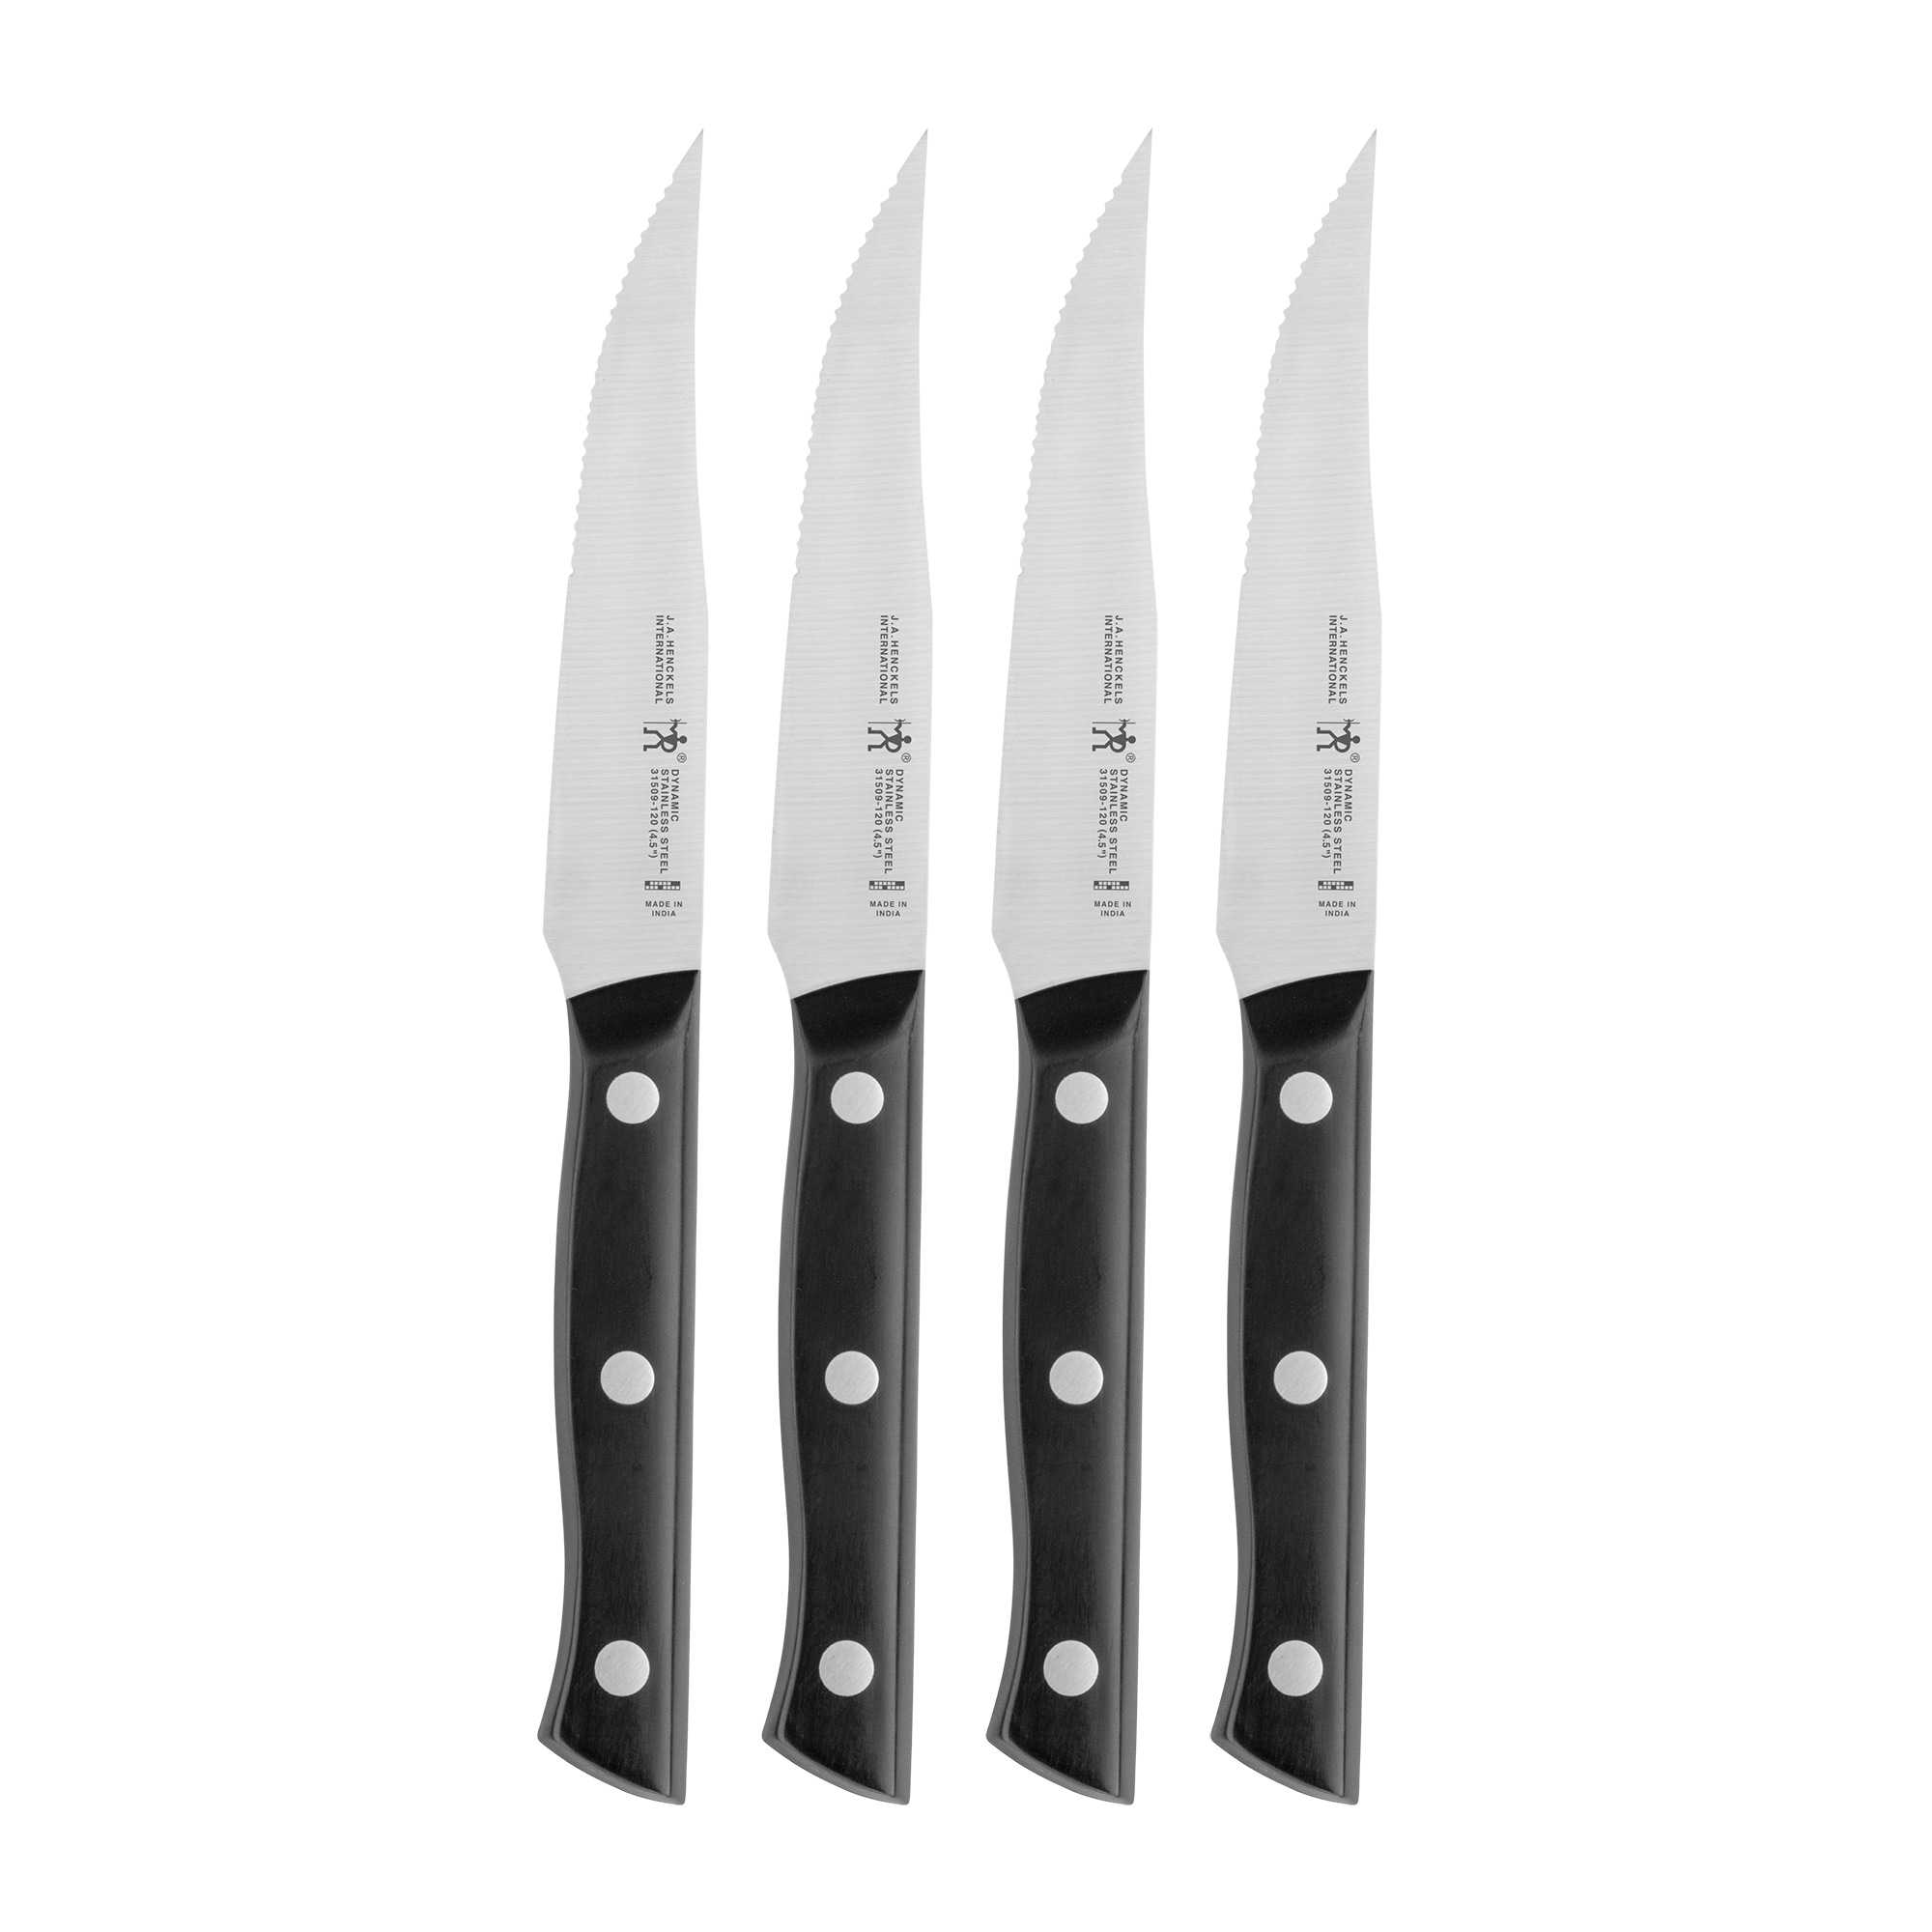 https://ak1.ostkcdn.com/images/products/is/images/direct/cf9c7c835f2265a638e9310a8f7e39fc99e97d65/Henckels-International-Dynamic-4-pc-Steak-Knife-Set.jpg